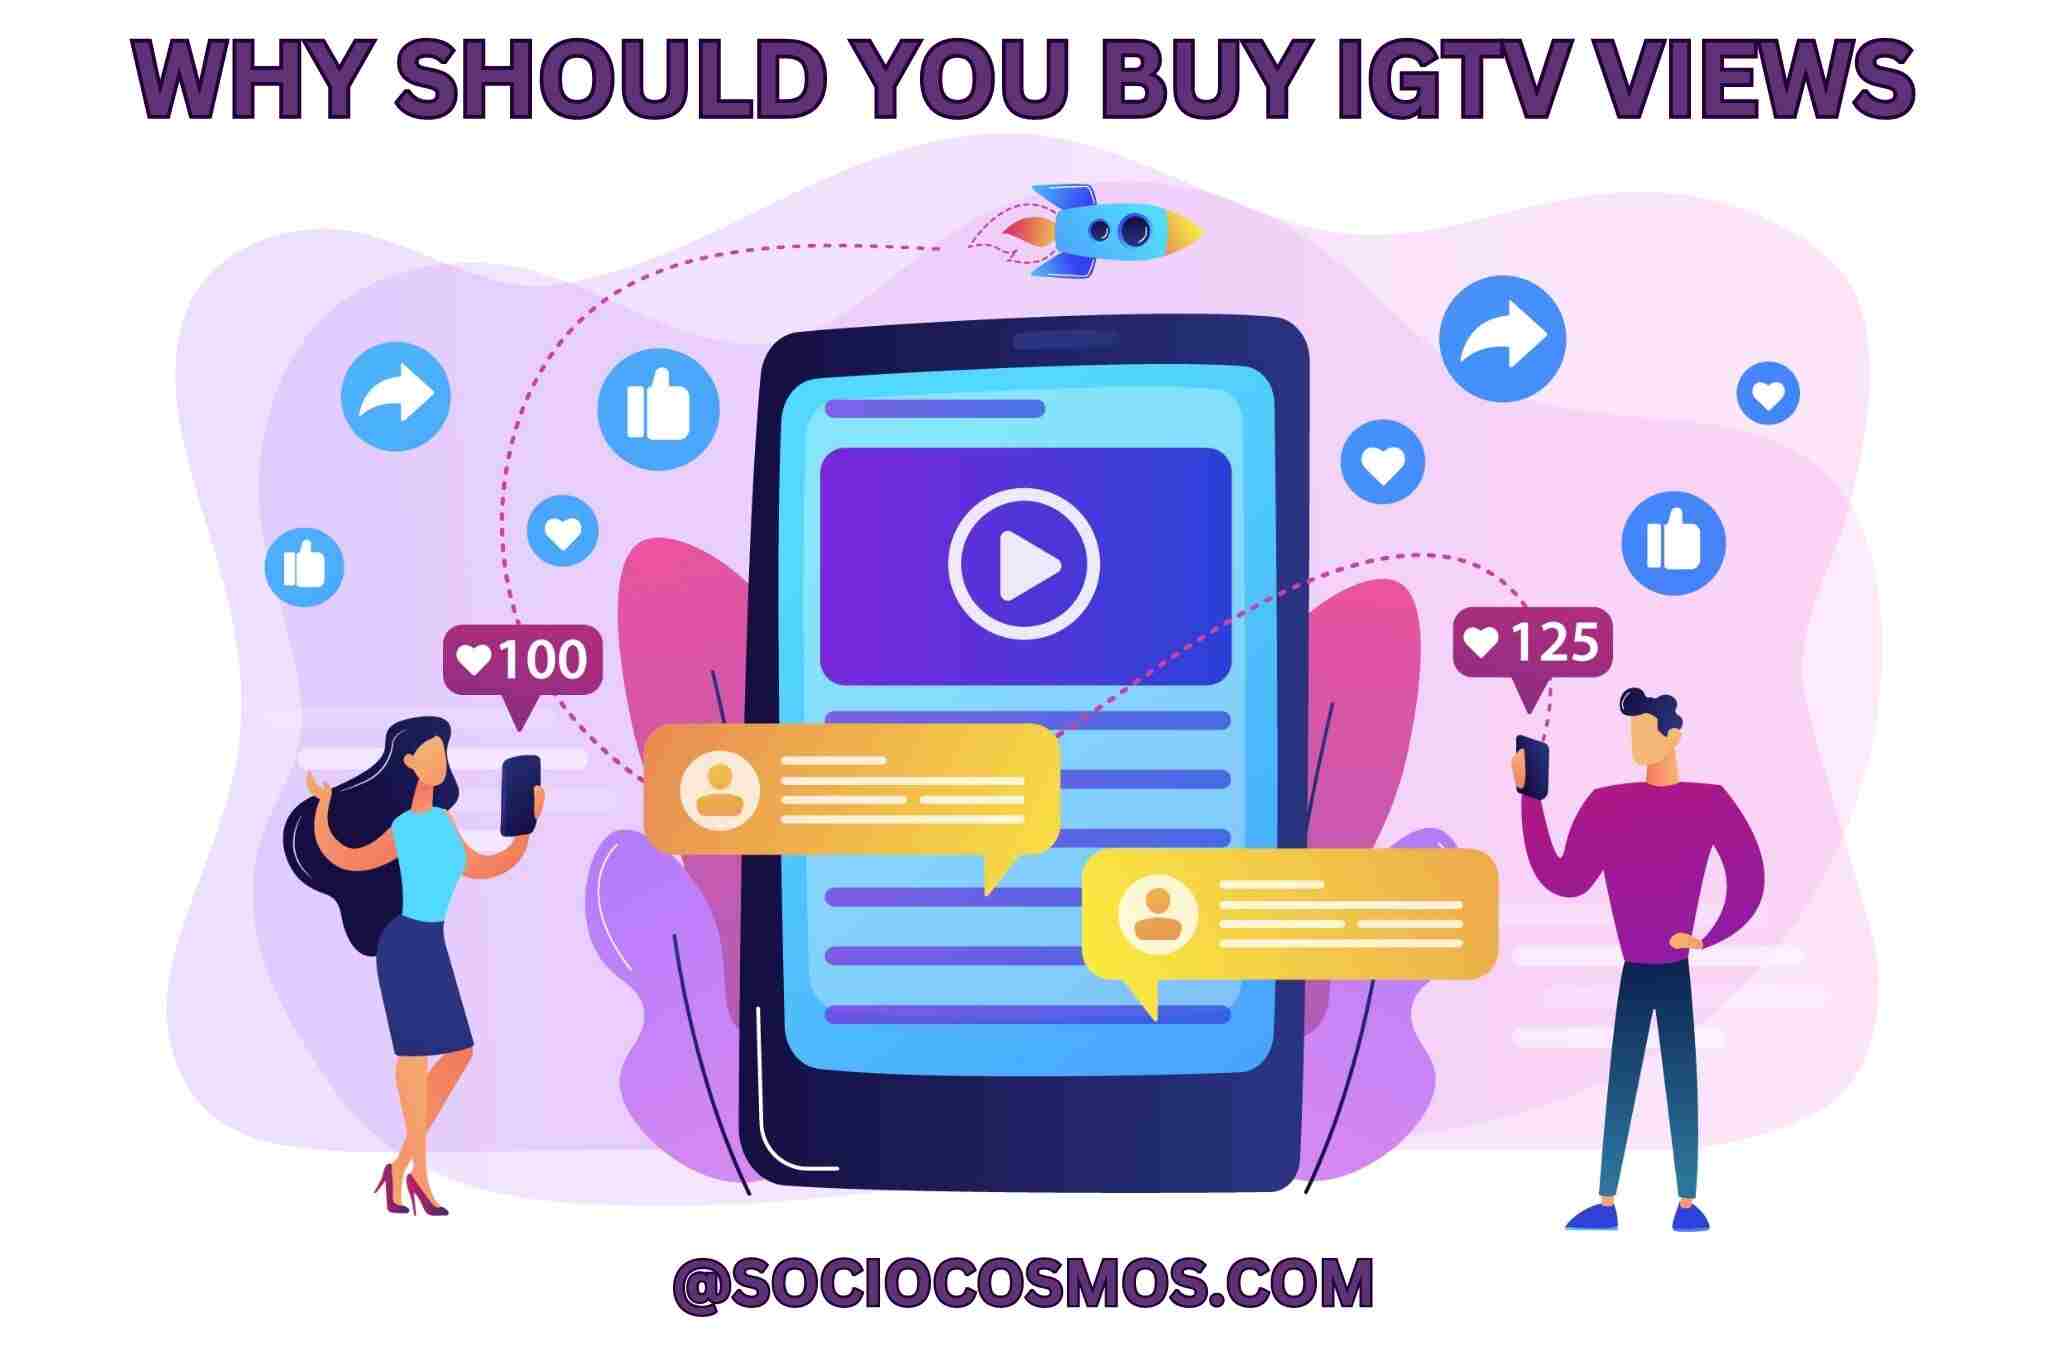 WHY SHOULD YOU BUY IGTV VIEWS